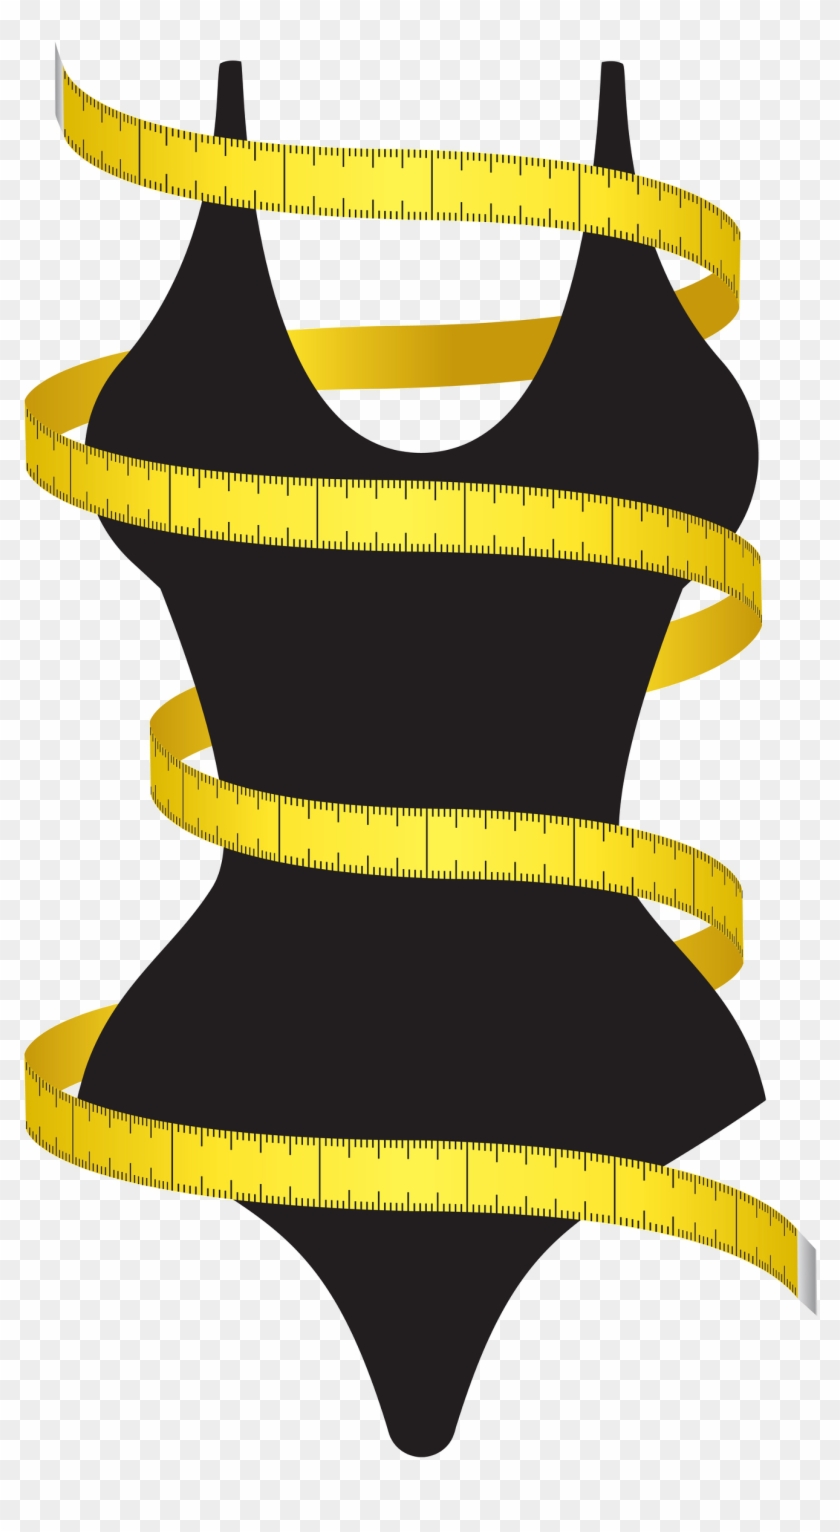 Loss Clipart Healthy Weight - Weight Loss Tape Measure Clipart #142841